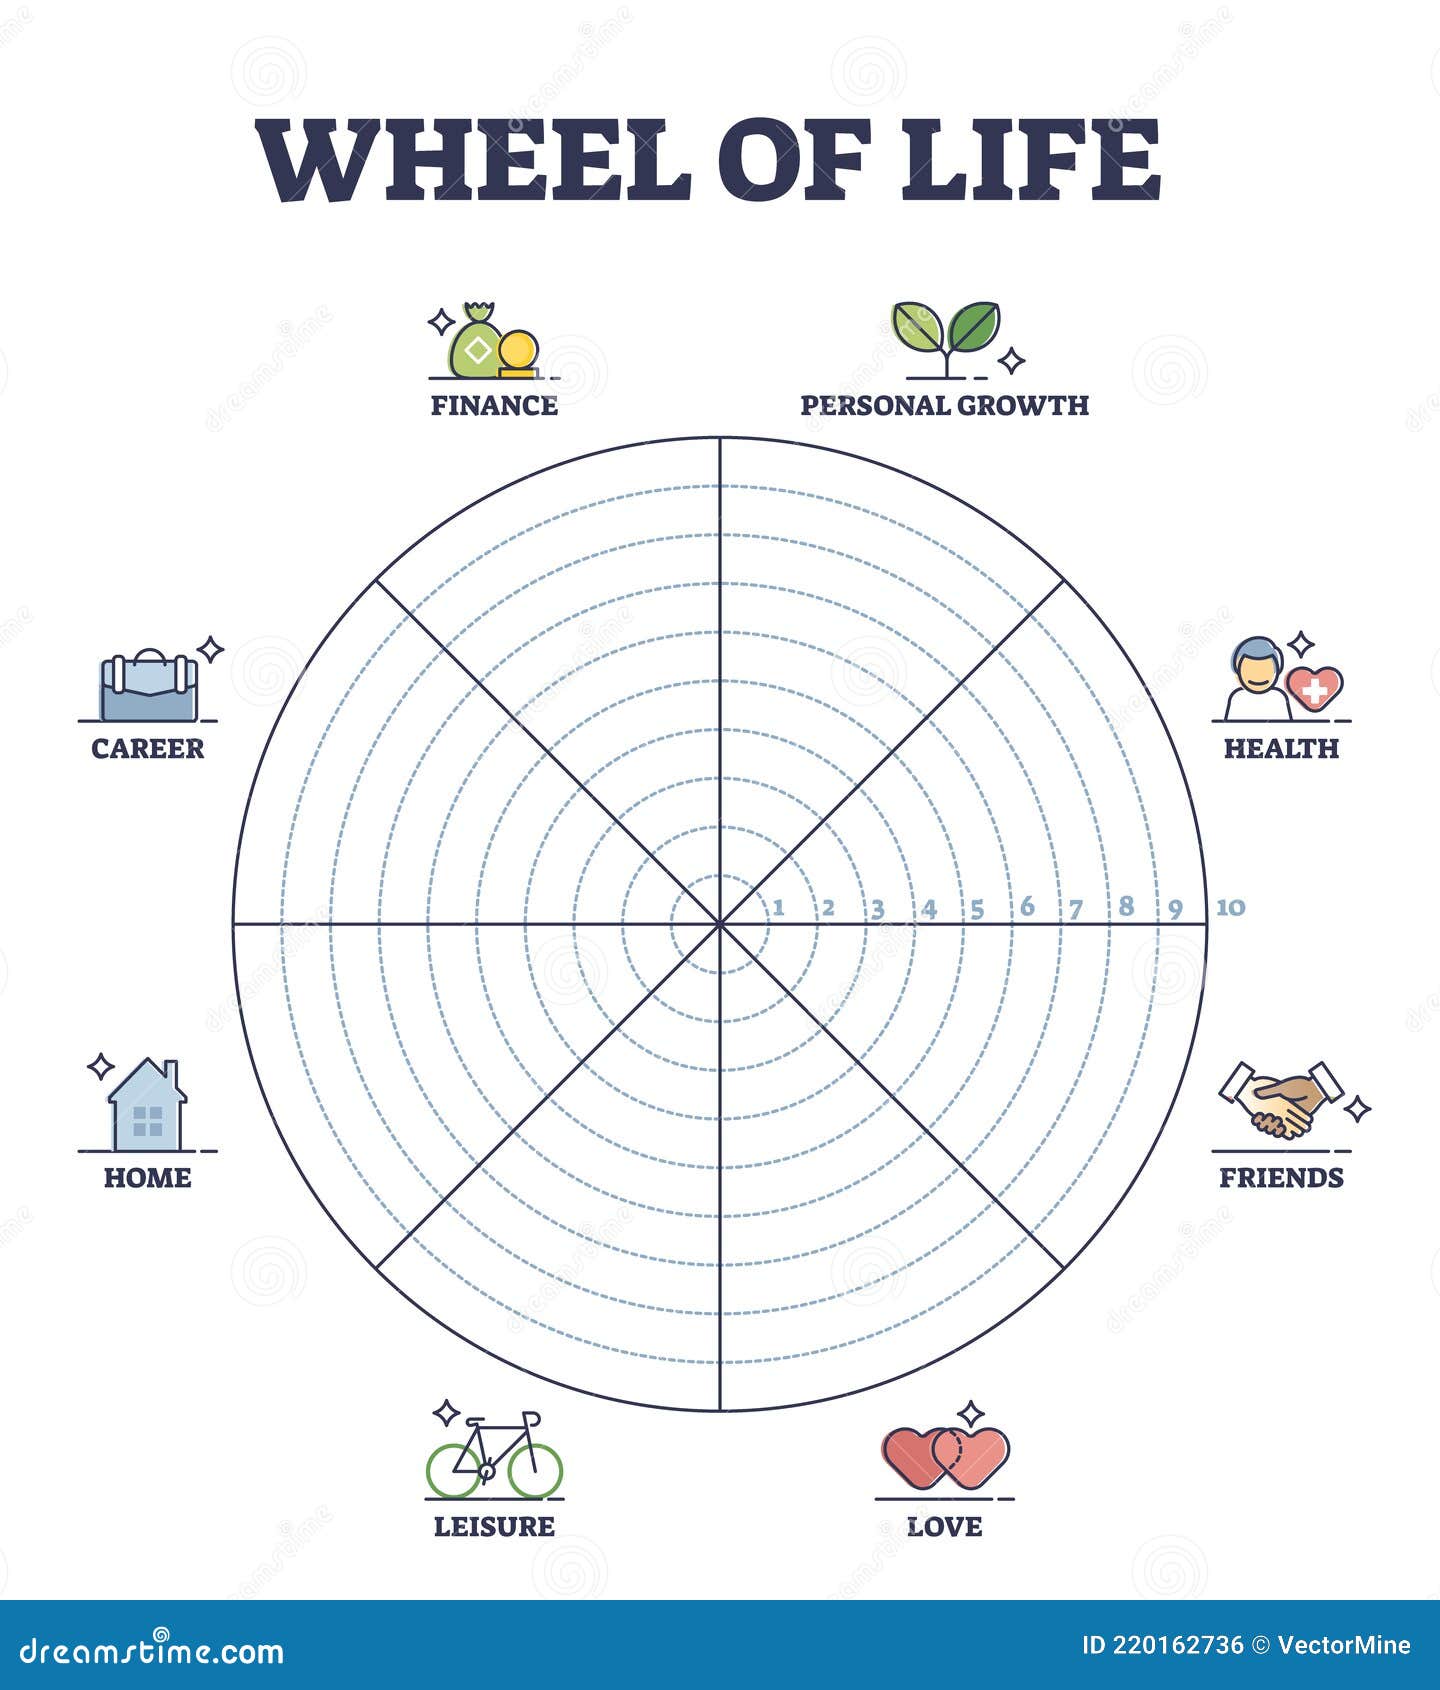 Wheel of Life Circular Scheme As Lifestyle Balance Control Outline With Blank Wheel Of Life Template